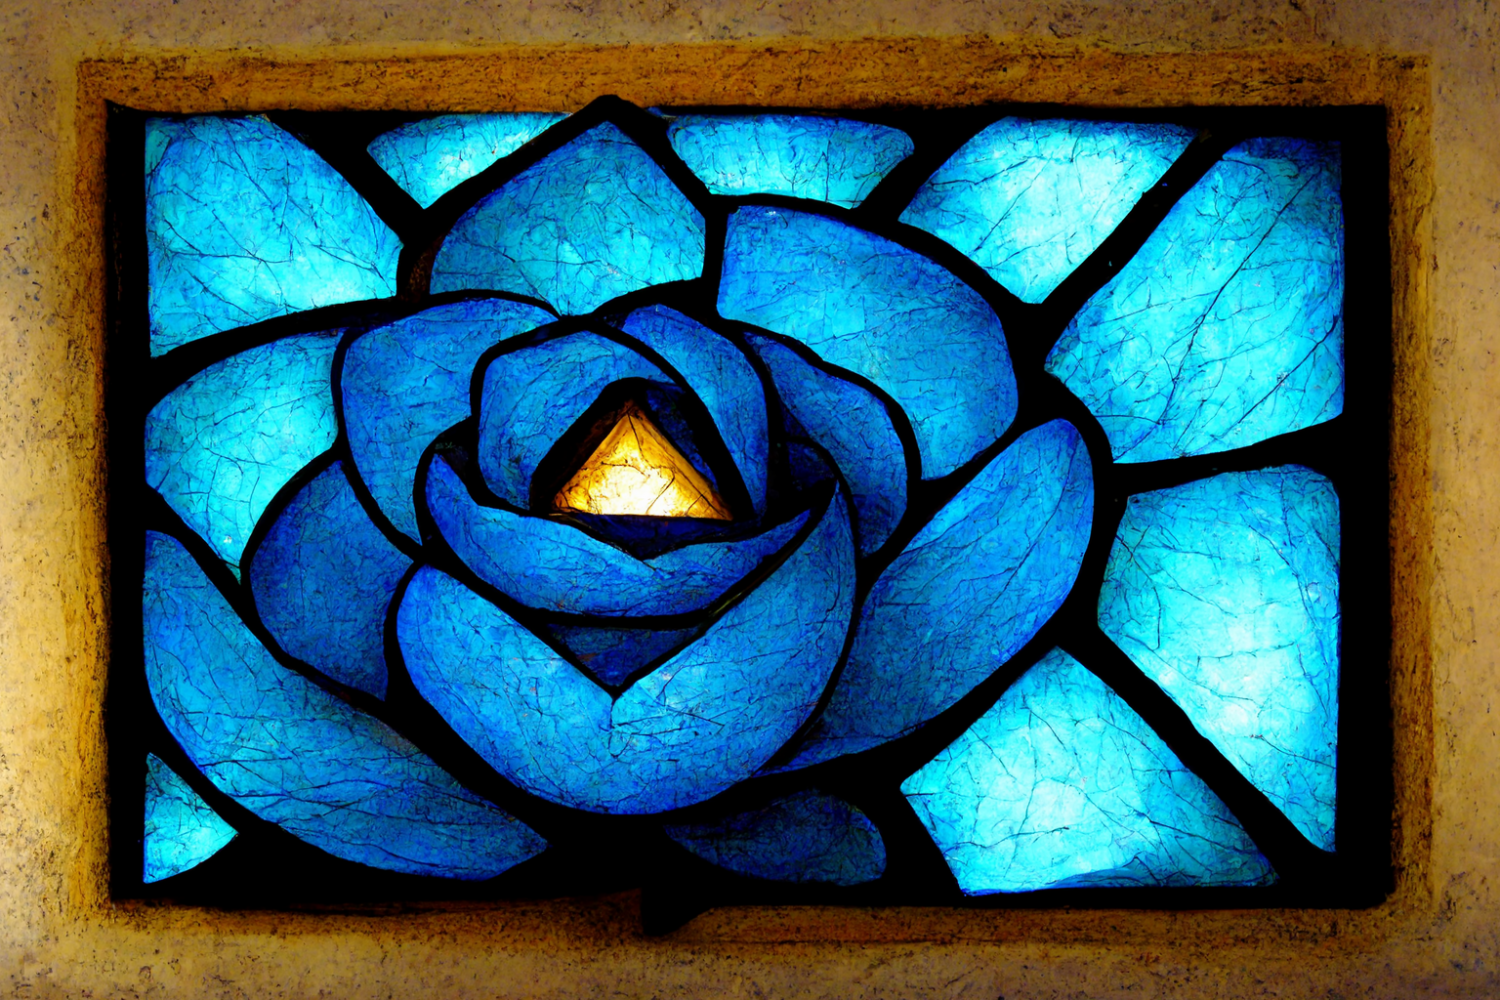 The_AI_Artist_blue_rose_light_stained_glass_small_window_geomet_2e7af058-7734-4ee4-b813-539cfb9b4f85.png